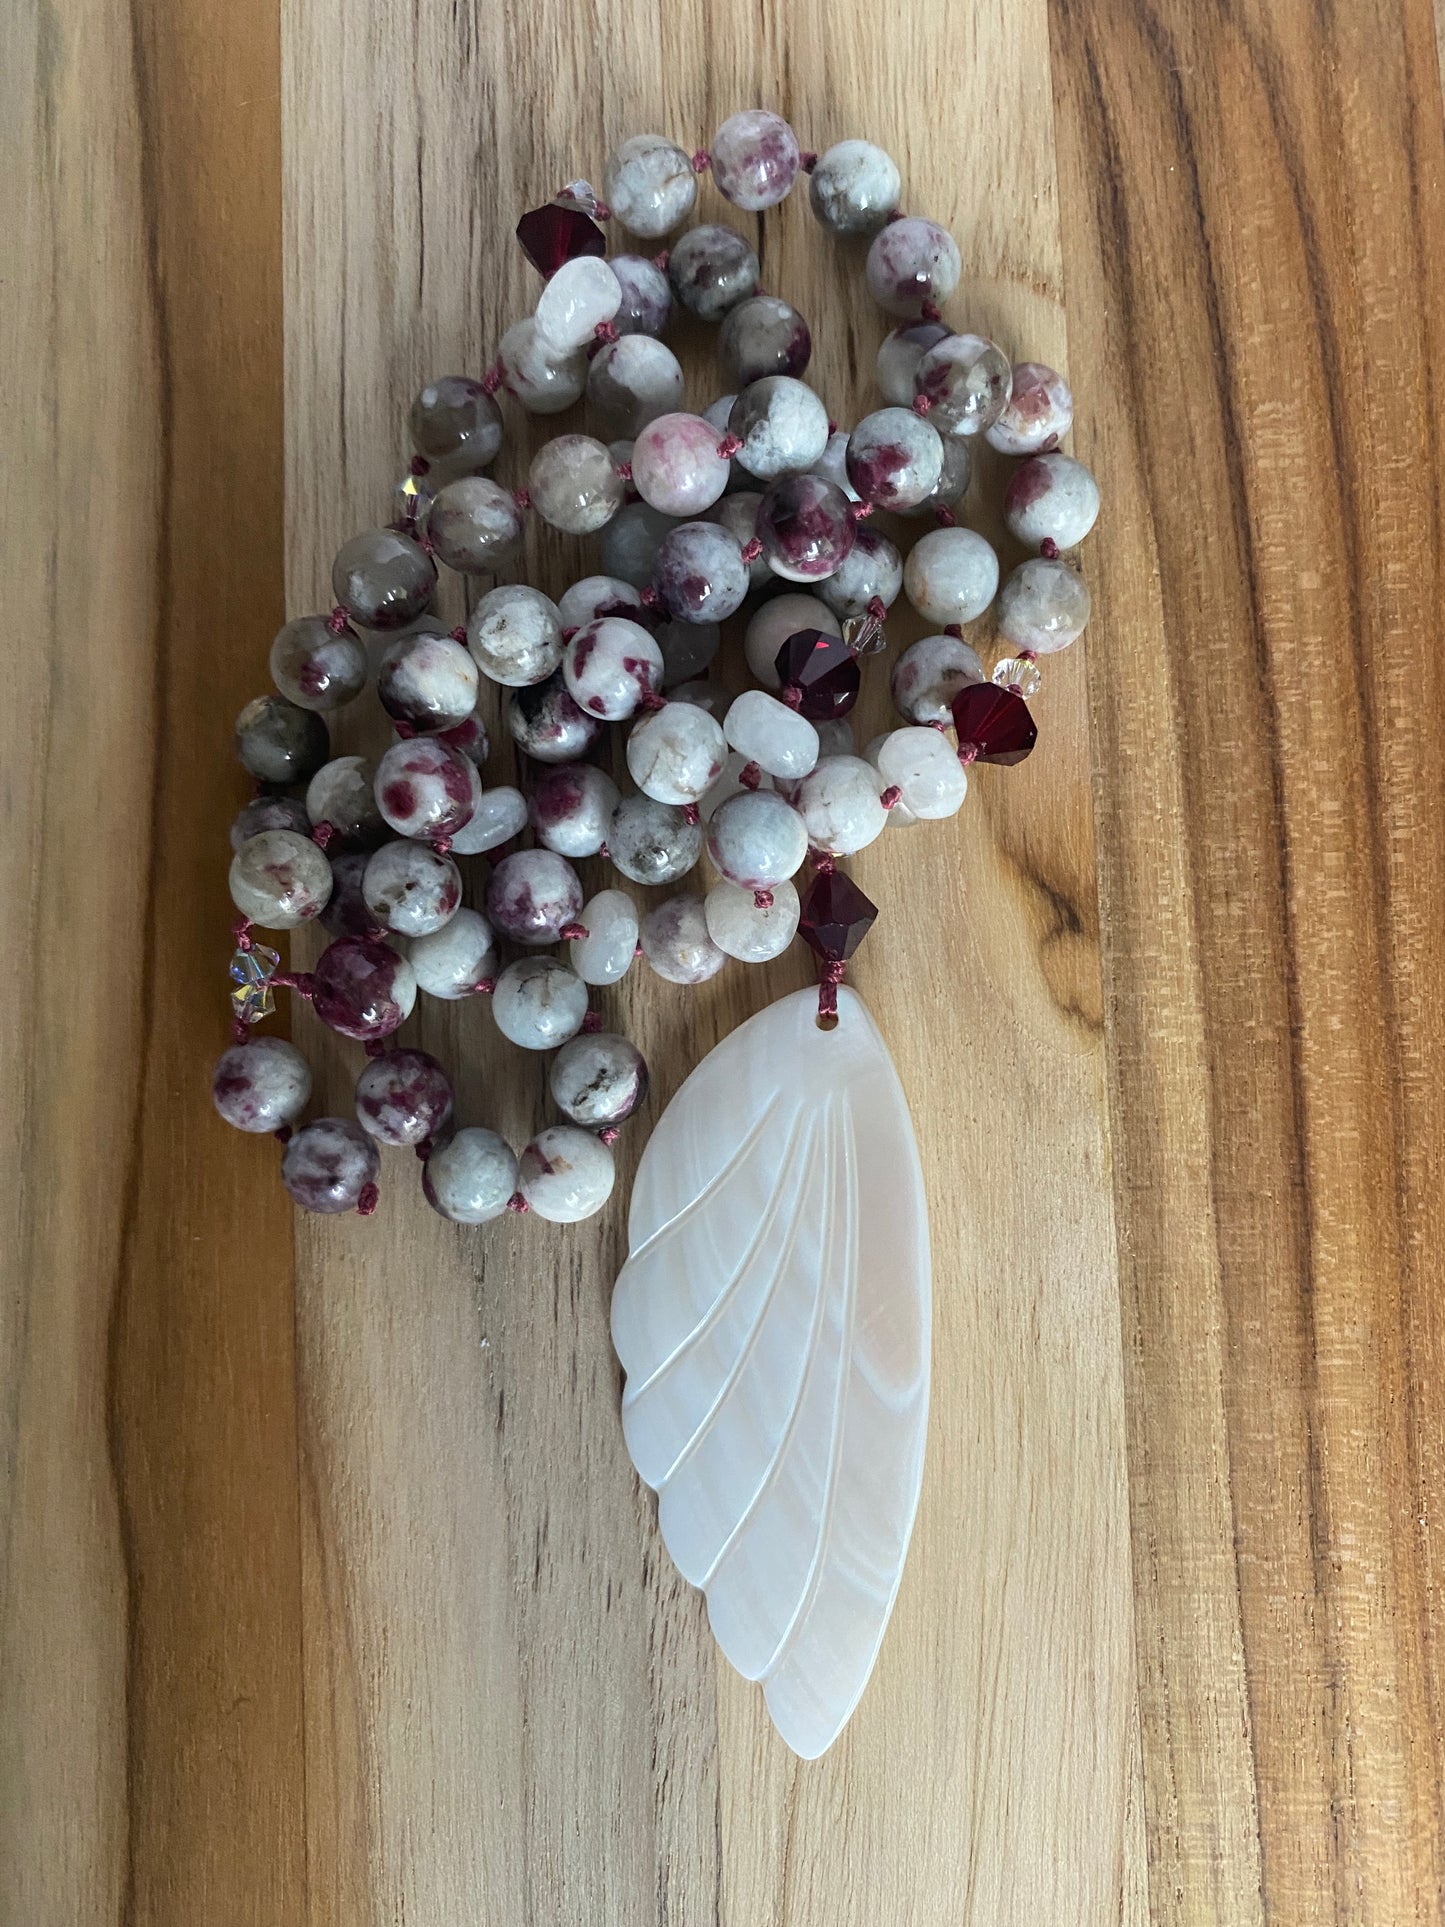 30" Long Mother of Pearl Wing Pendant Necklace with Tourmaline, Moonstone & Crystal Beads